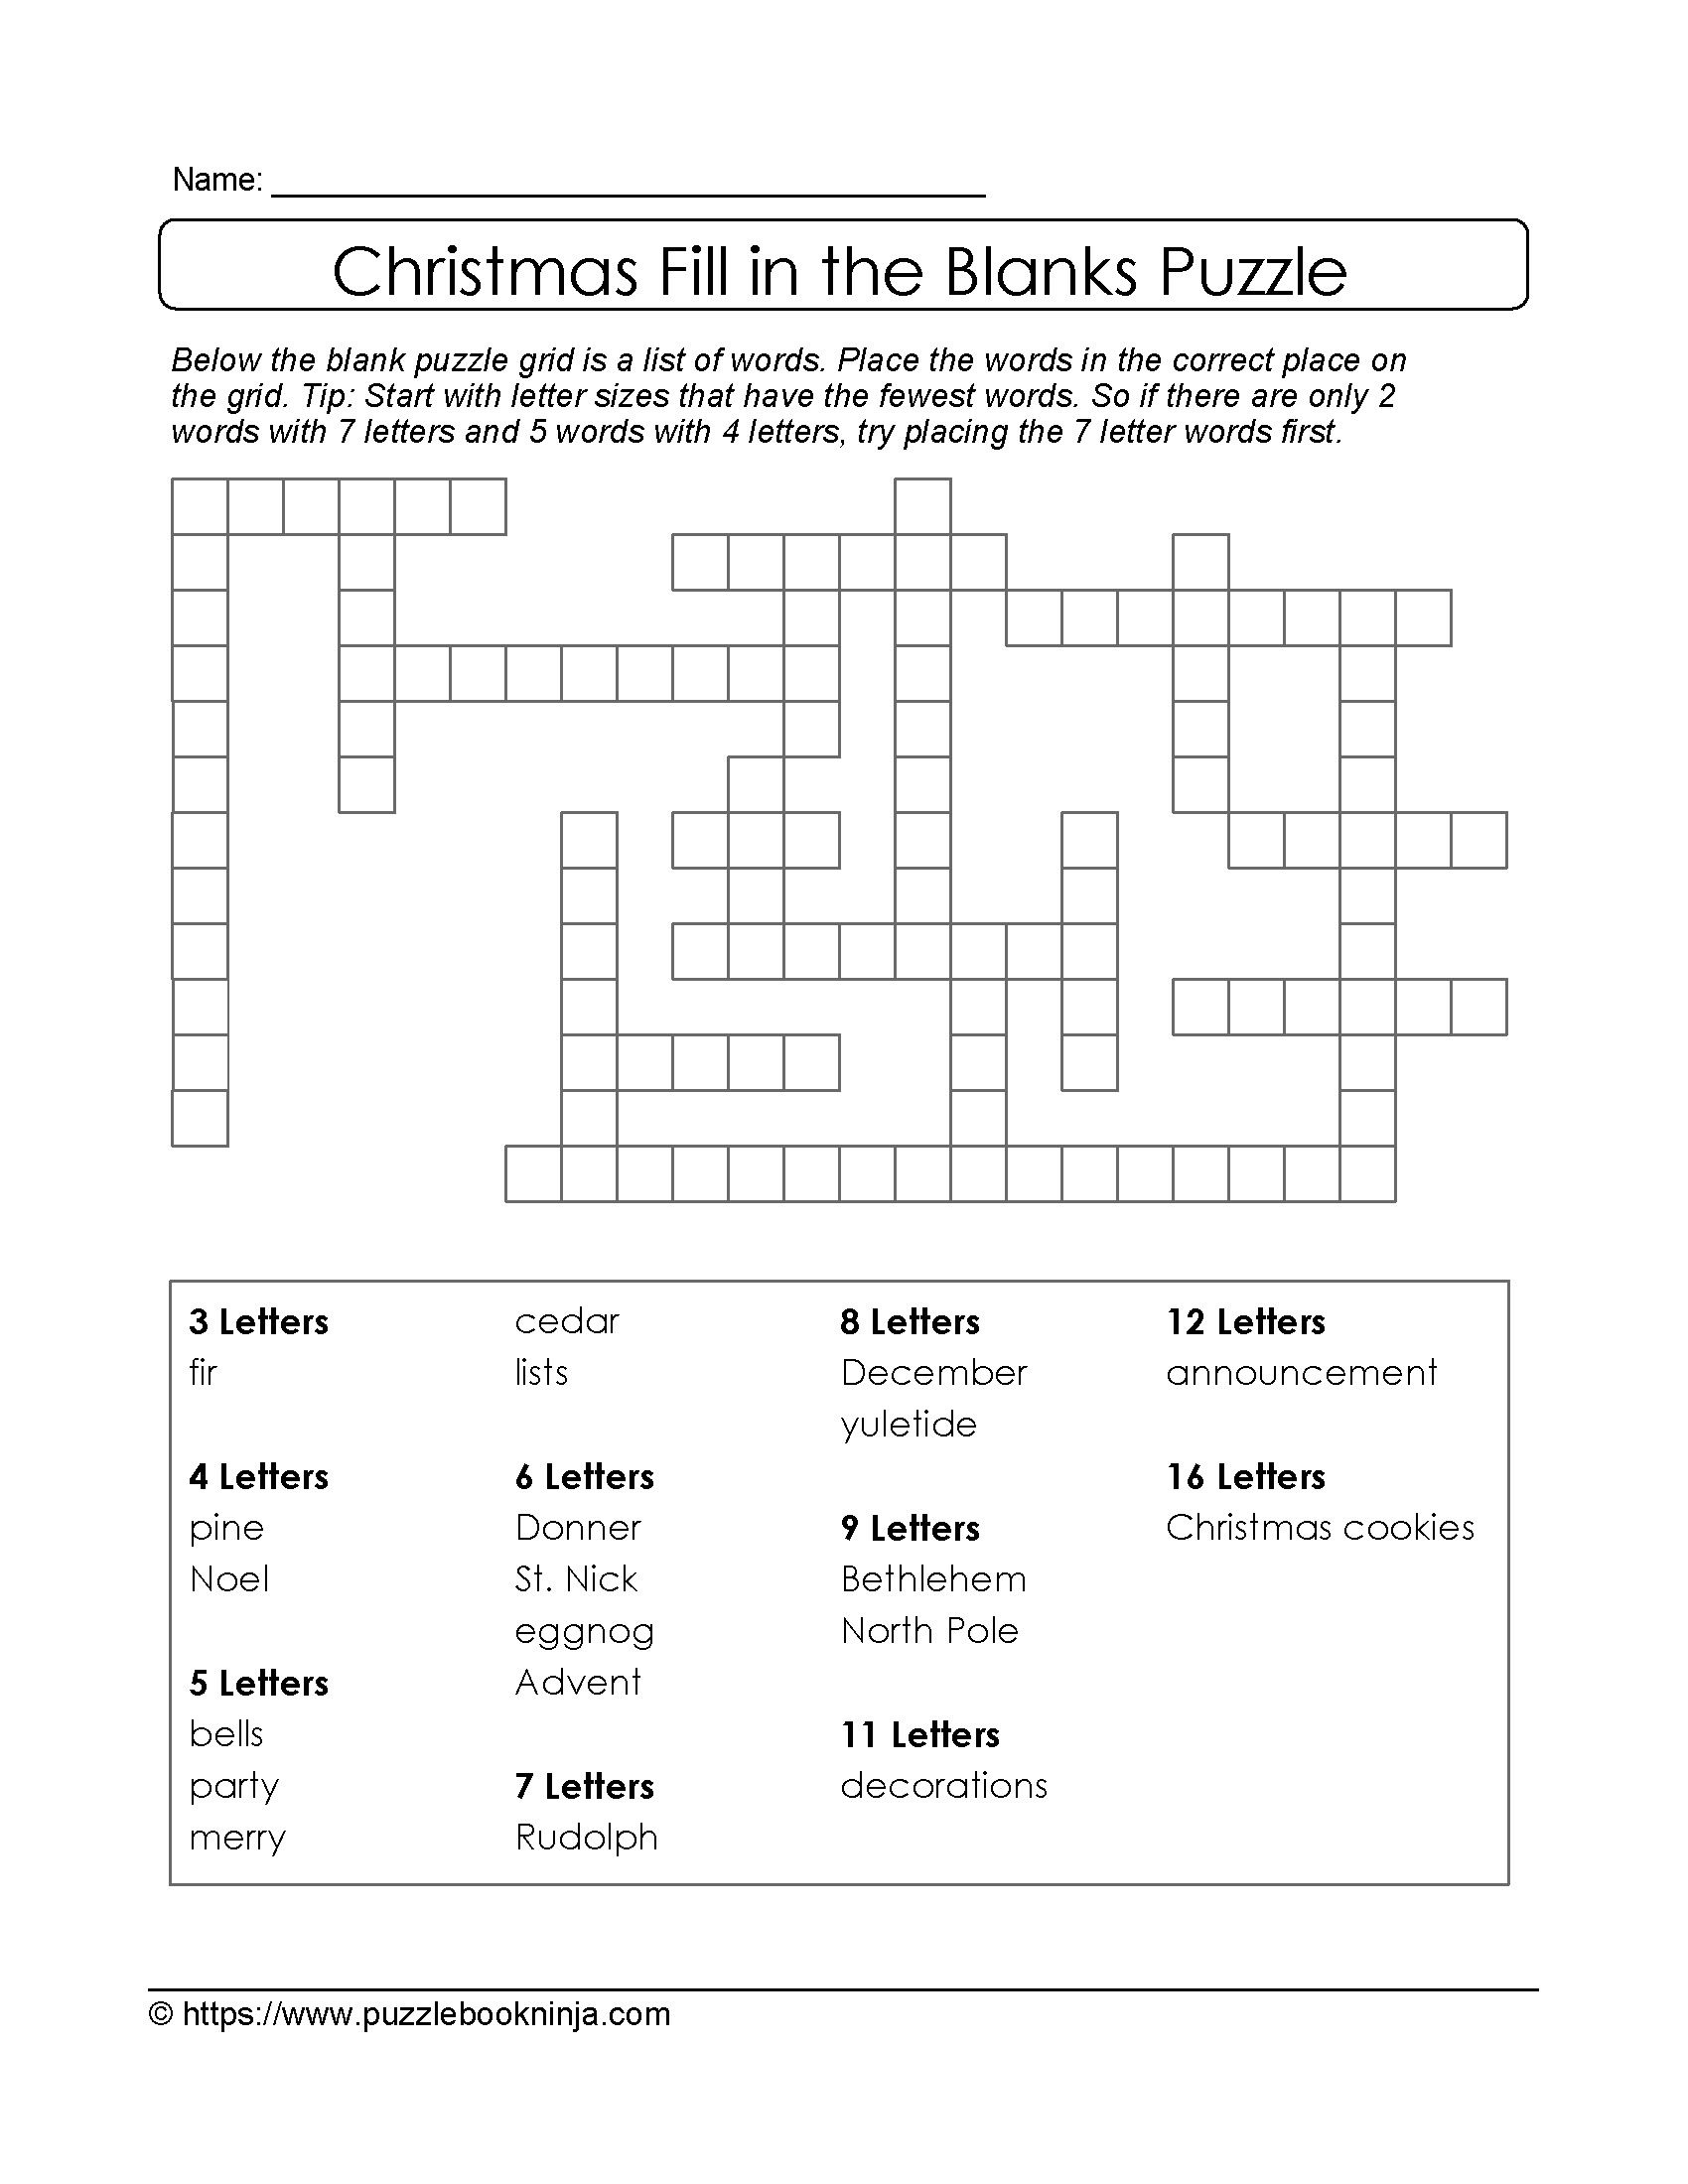 Christmas Printable Puzzle. Free Fill In The Blanks. | Christmas - Free Printable Christmas Puzzles